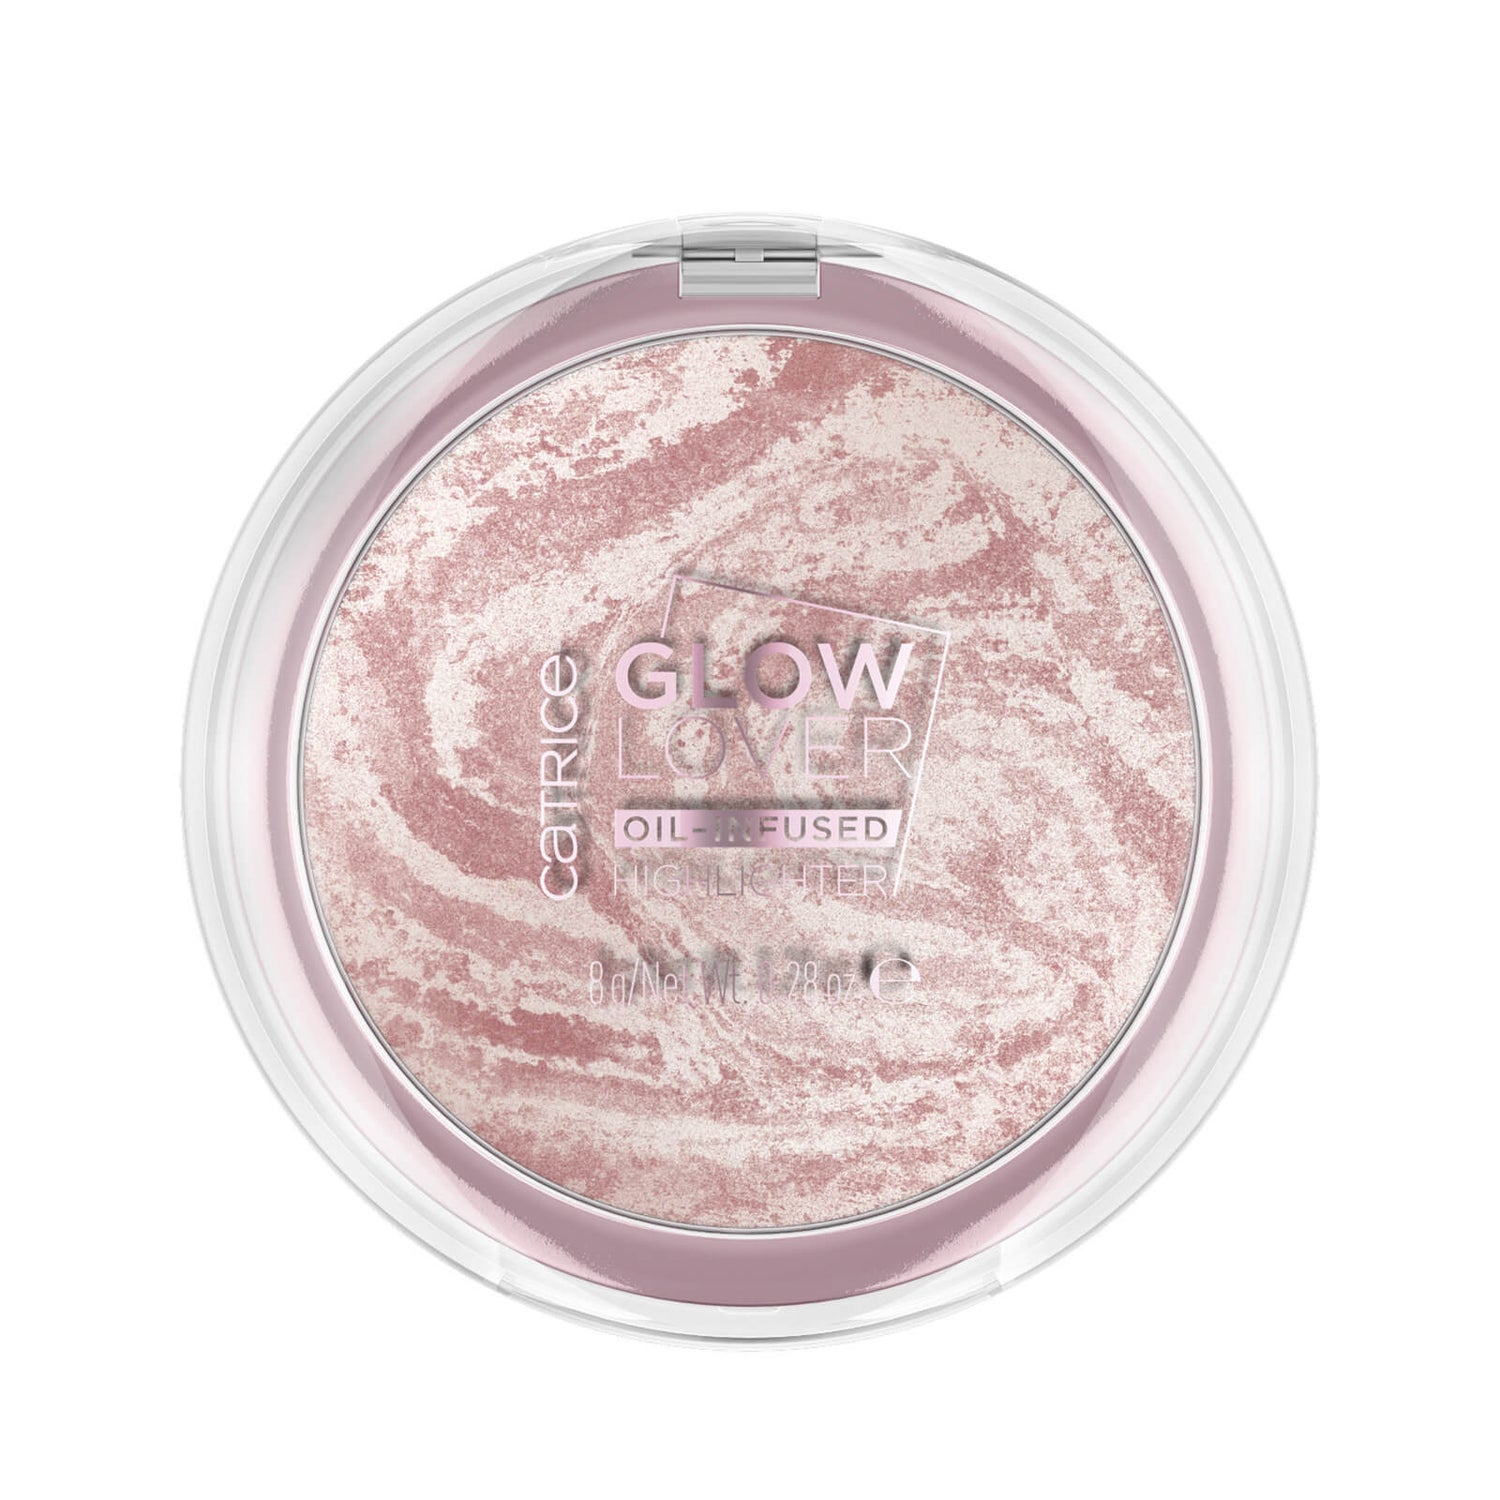 | US Highlighter GLOSSYBOX Catrice